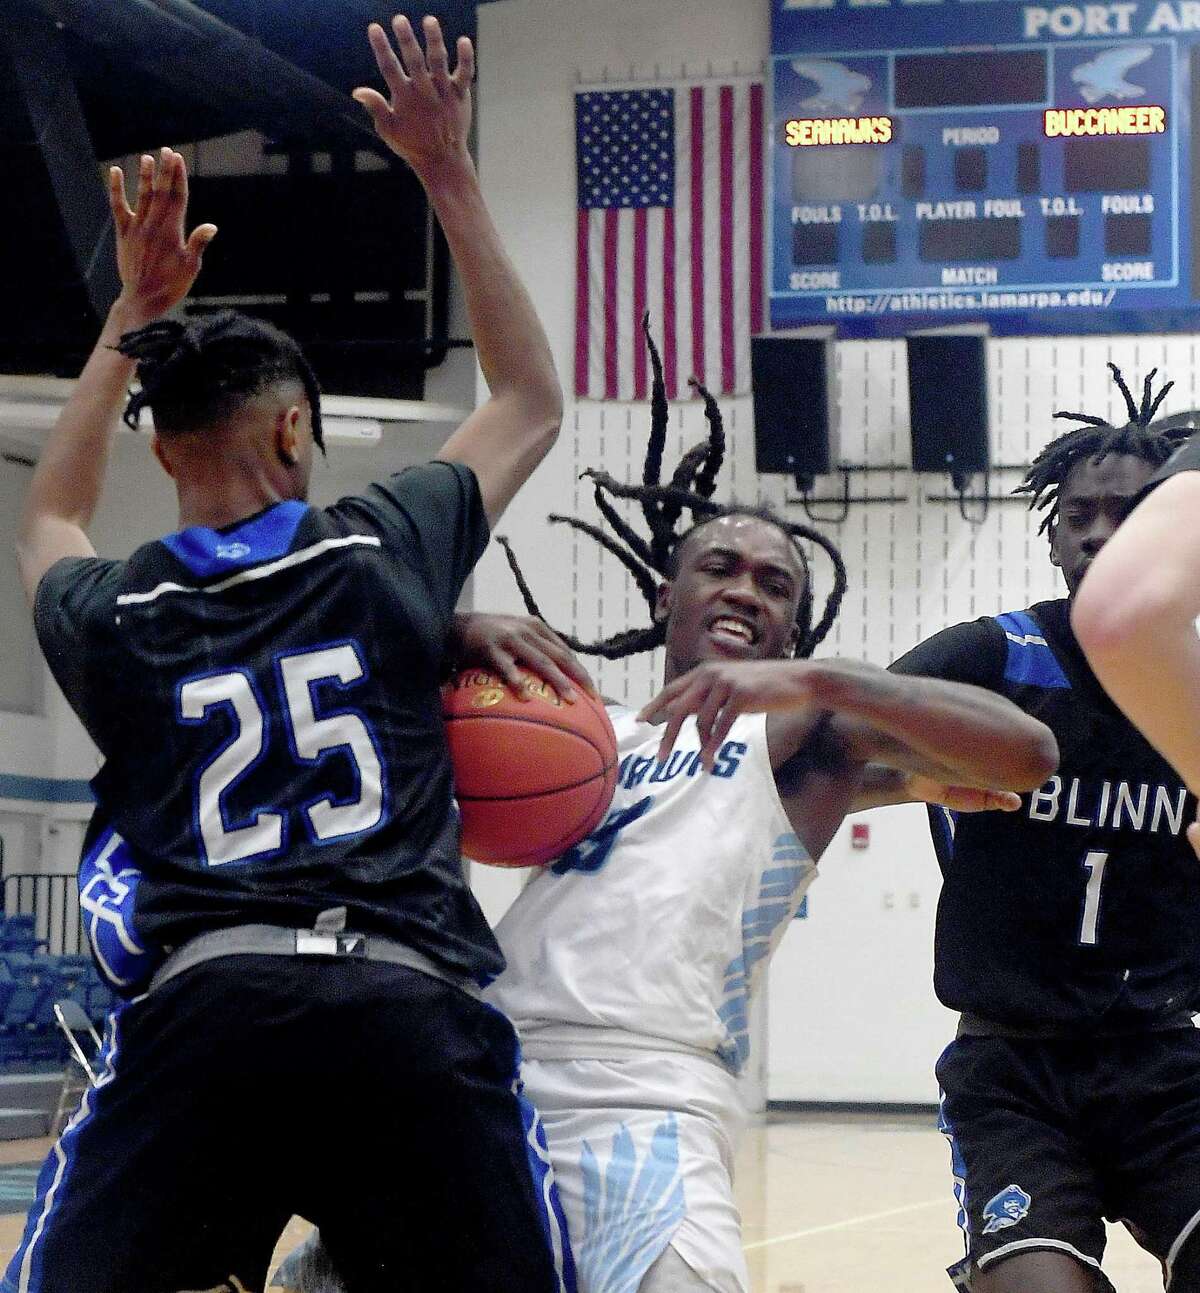 Lamar State College Port Arthur's Kanntrell Burney is double teamed by Blinn's Tyler Jackson (left) and Braelon Seals during their game Wednesday at LSCPA. Photo made Wednesday, January 19, 2022 Kim Brent/The Enterprise